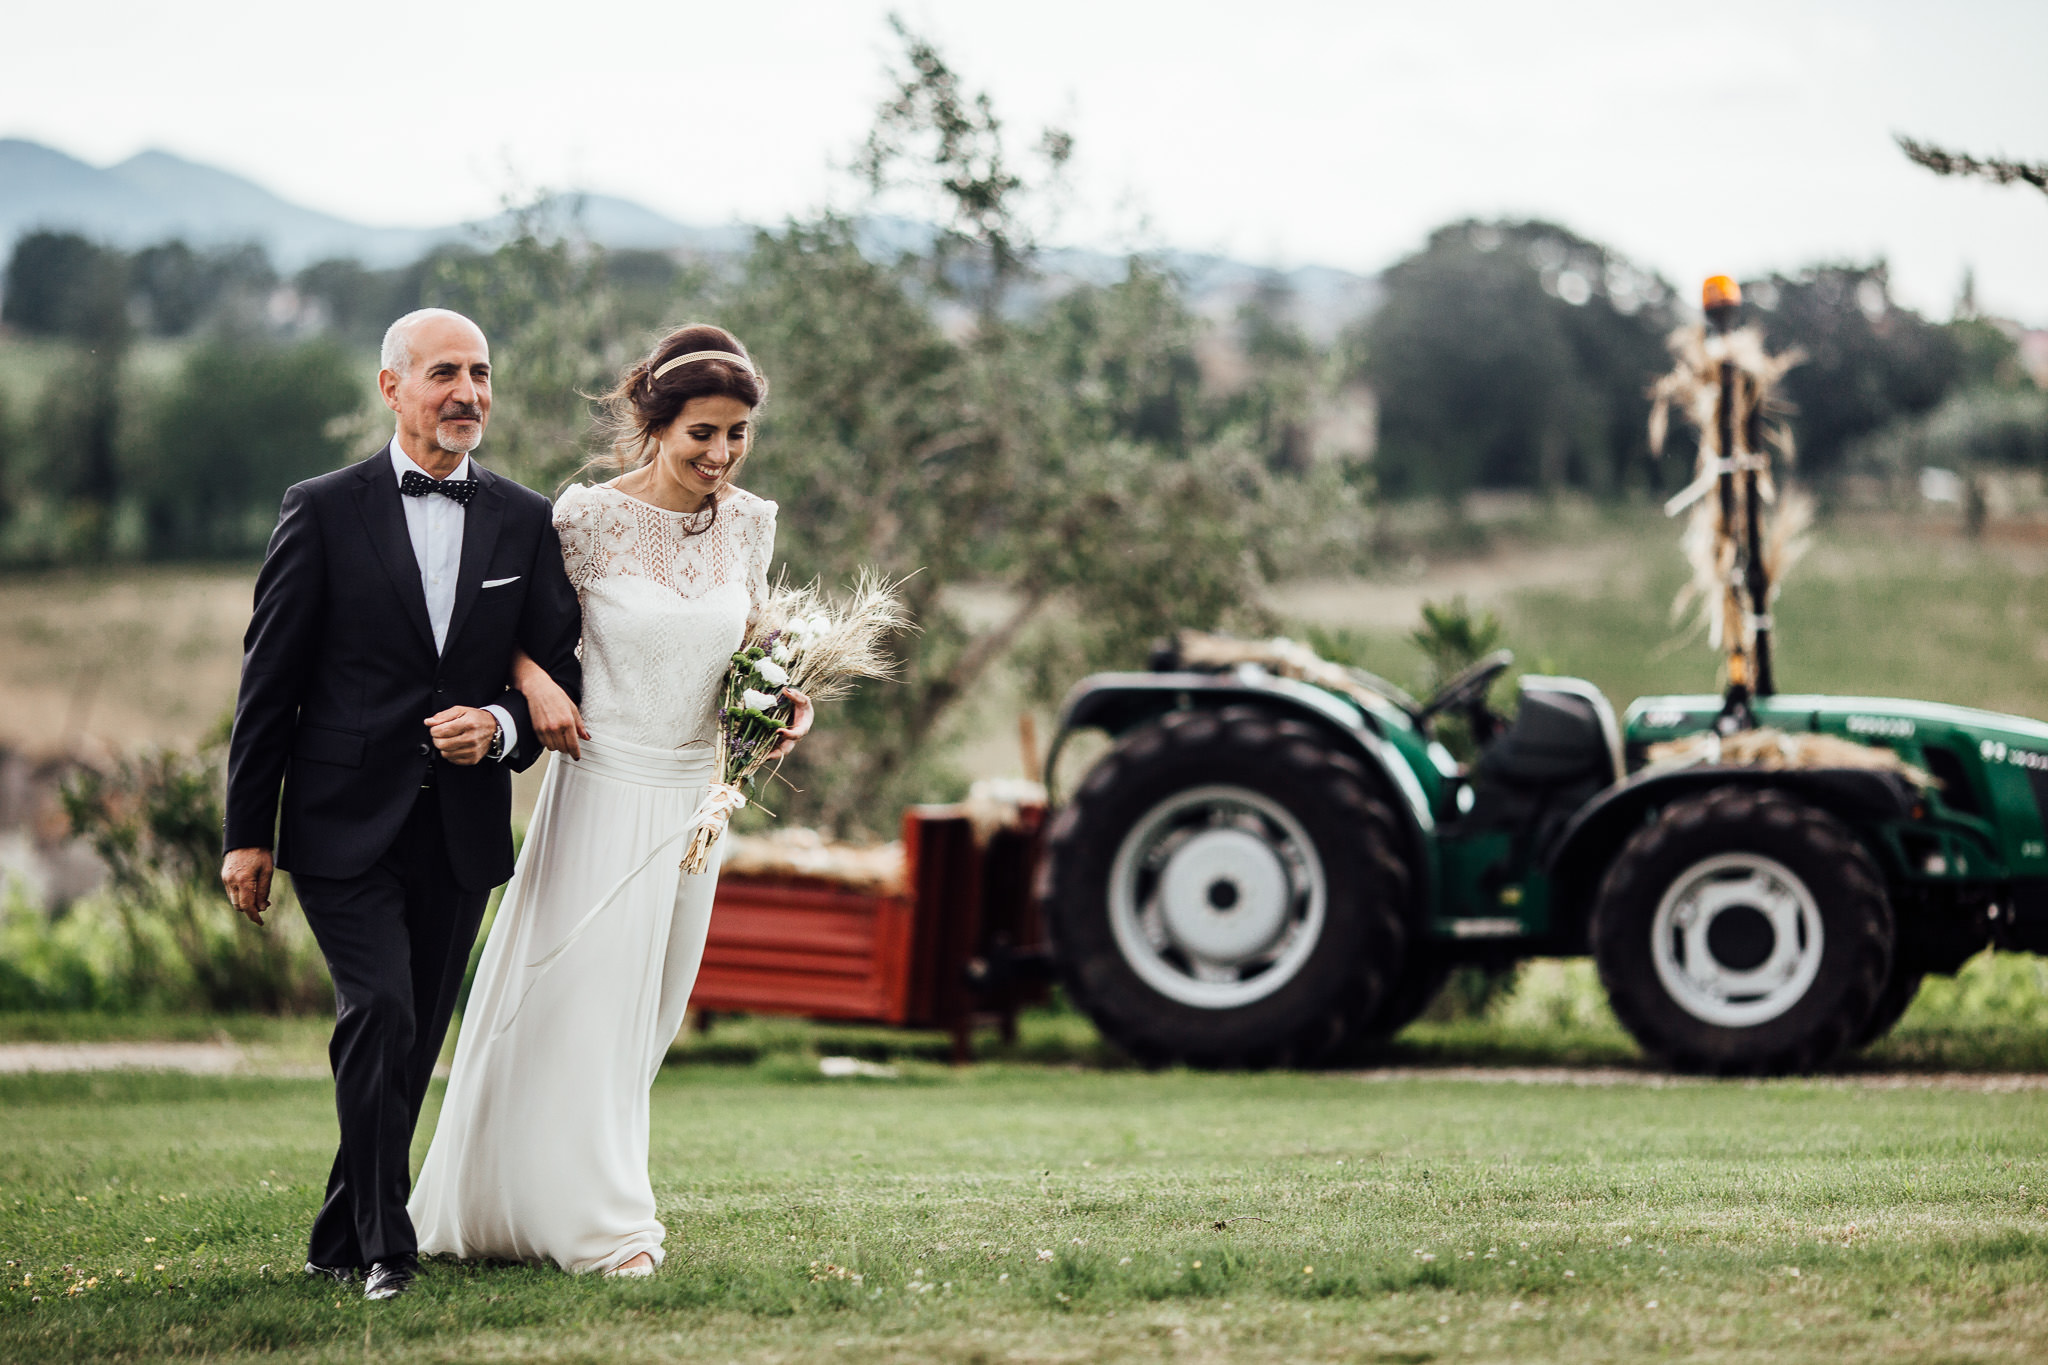 outdoor wedding inspiration in italy